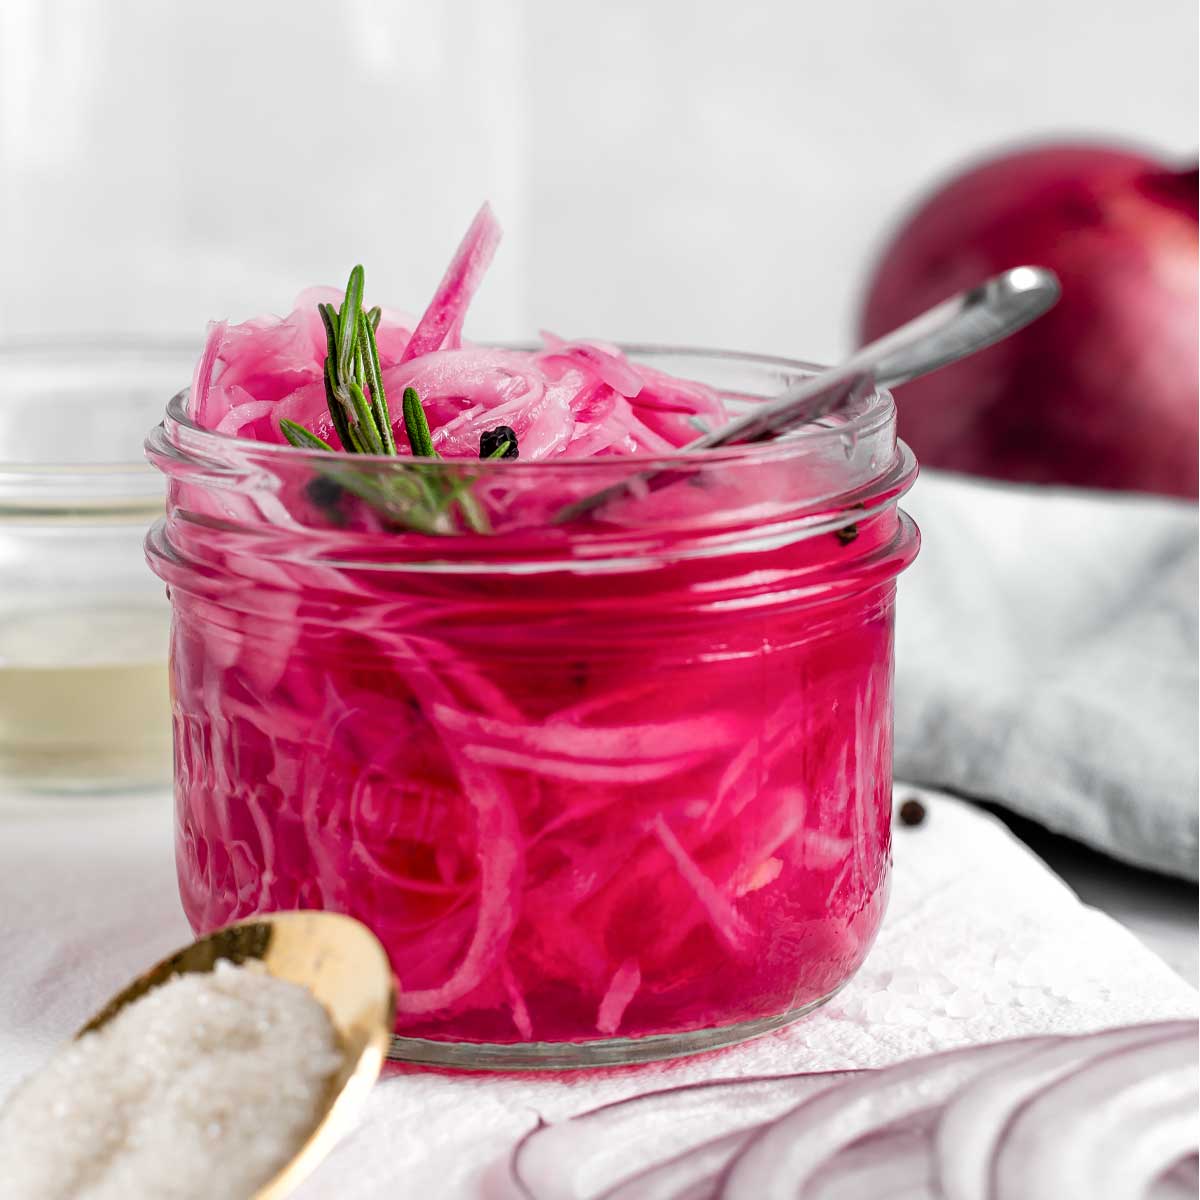 Easy Pickled Red Onions - Made with Just 3 Ingredients!